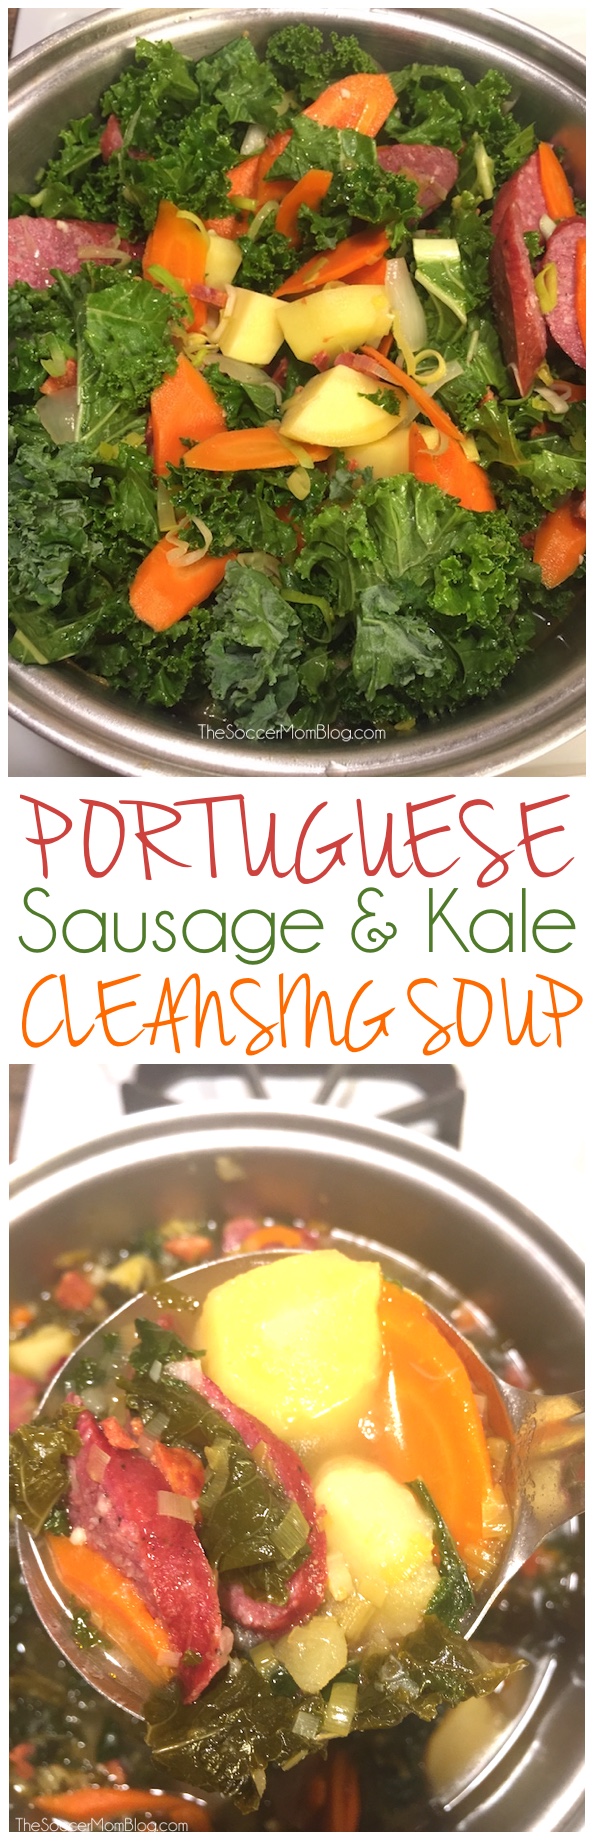 Portuguese Sausage and Kale Soup is the PERFECT recipe for getting your eating on track after the holidays! Packed w/veggies & protein, plus it couldn't be easier: a one-pot meal!